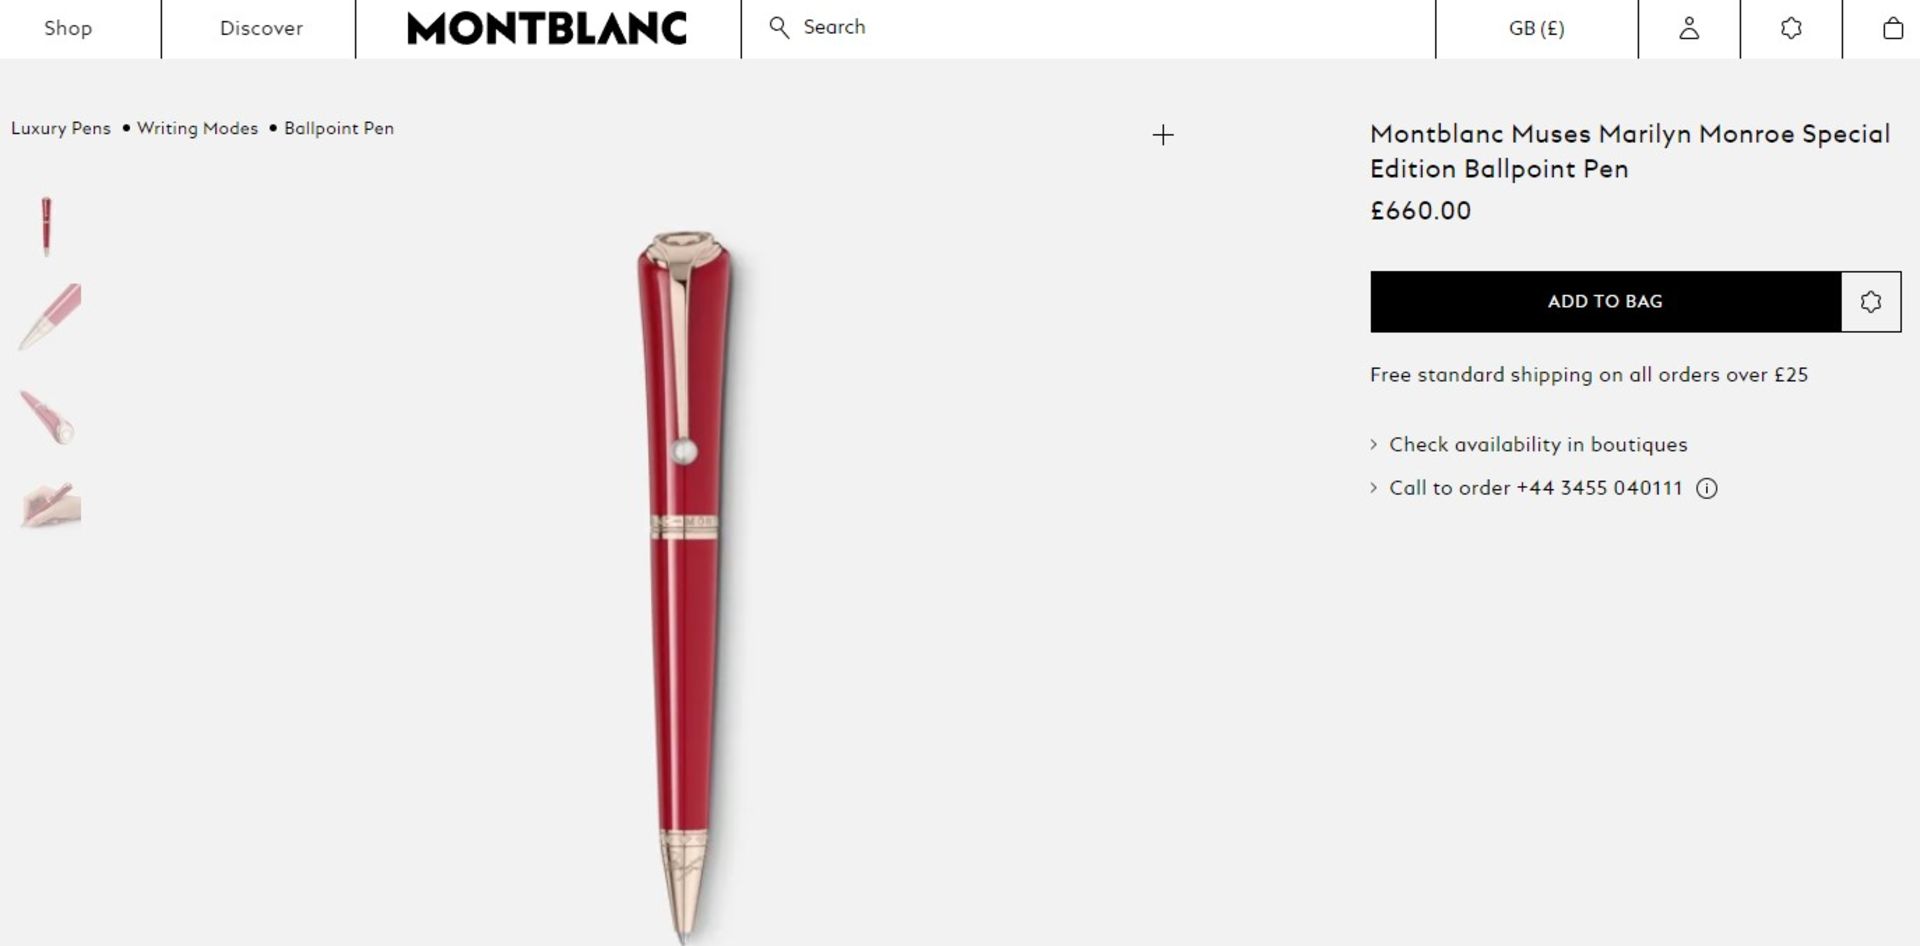 Montblanc Marilyn Monroe Ltd Edition-New Example - Image 6 of 6